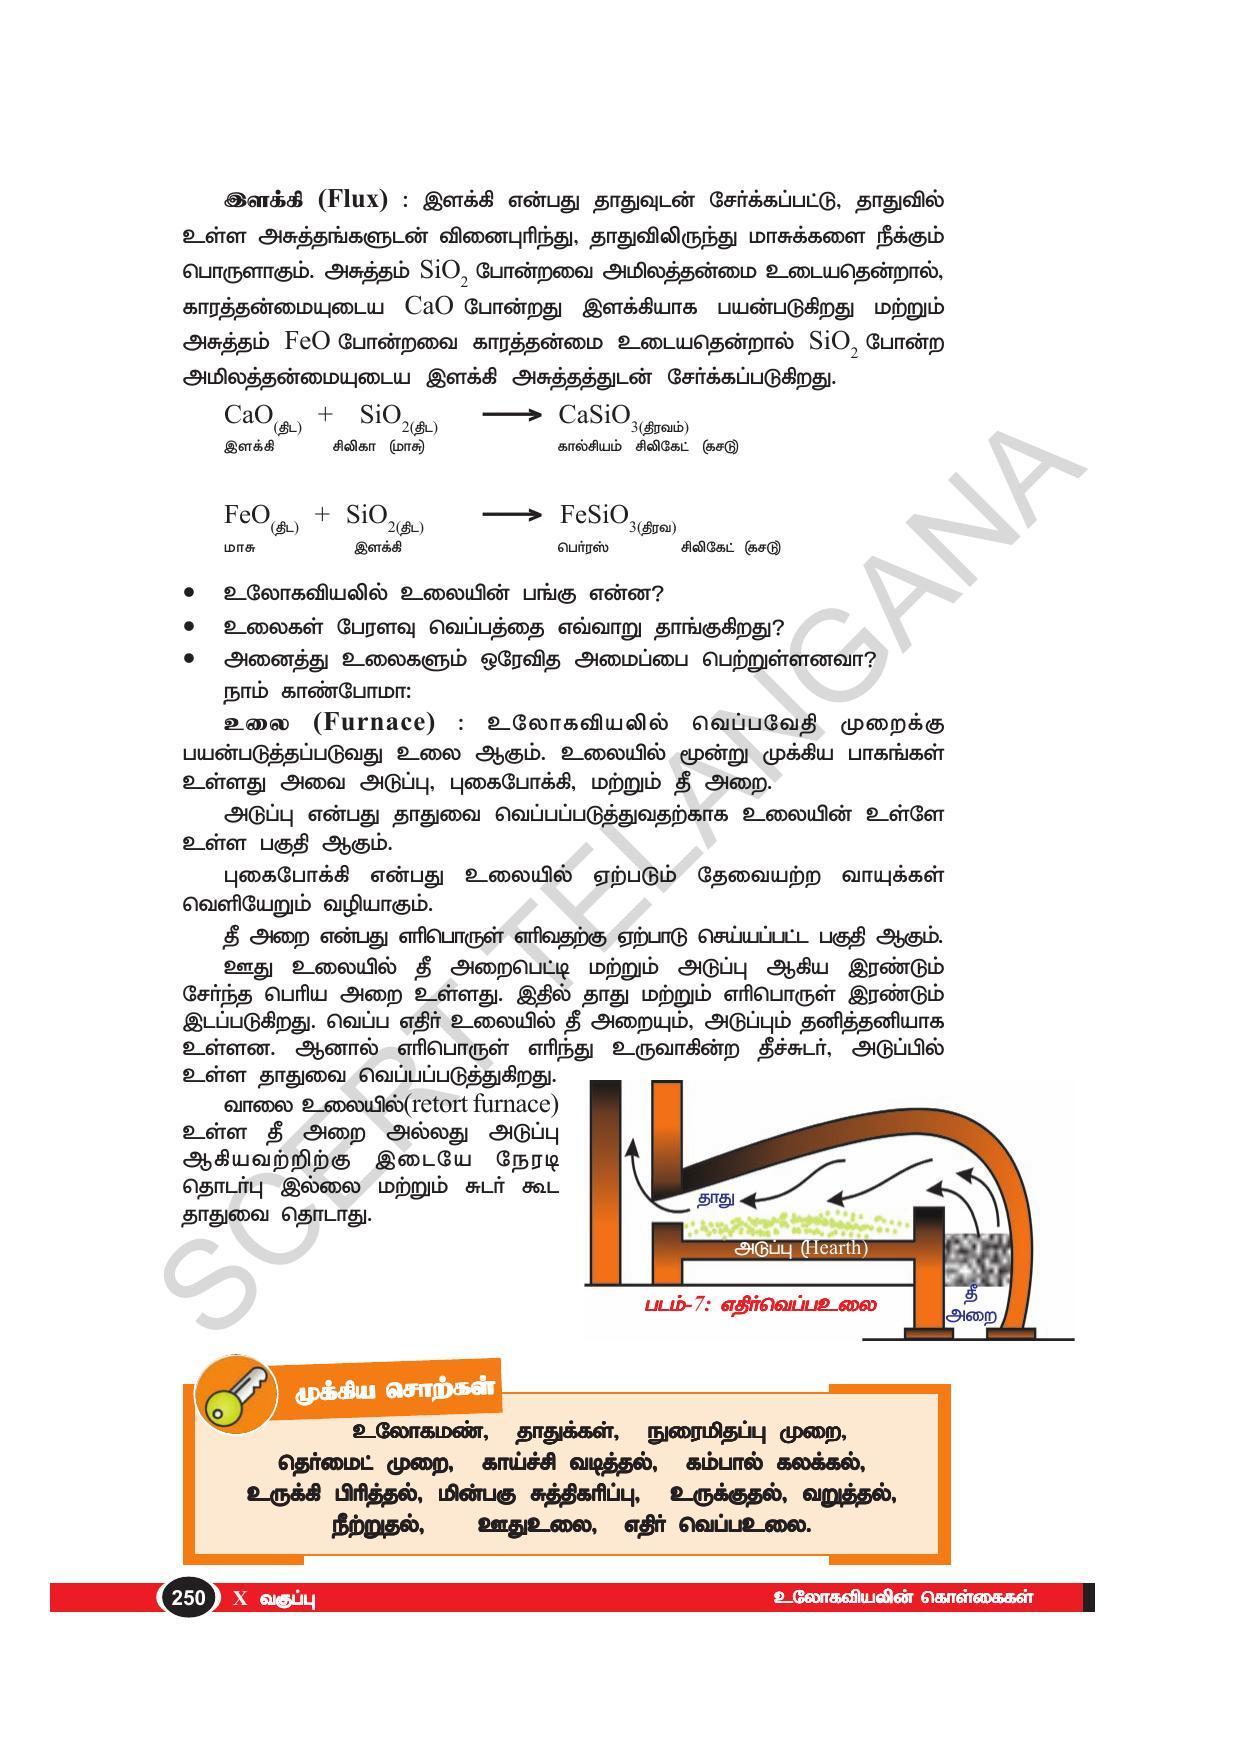 TS SCERT Class 10 Physical Science(Tamil Medium) Text Book - Page 262